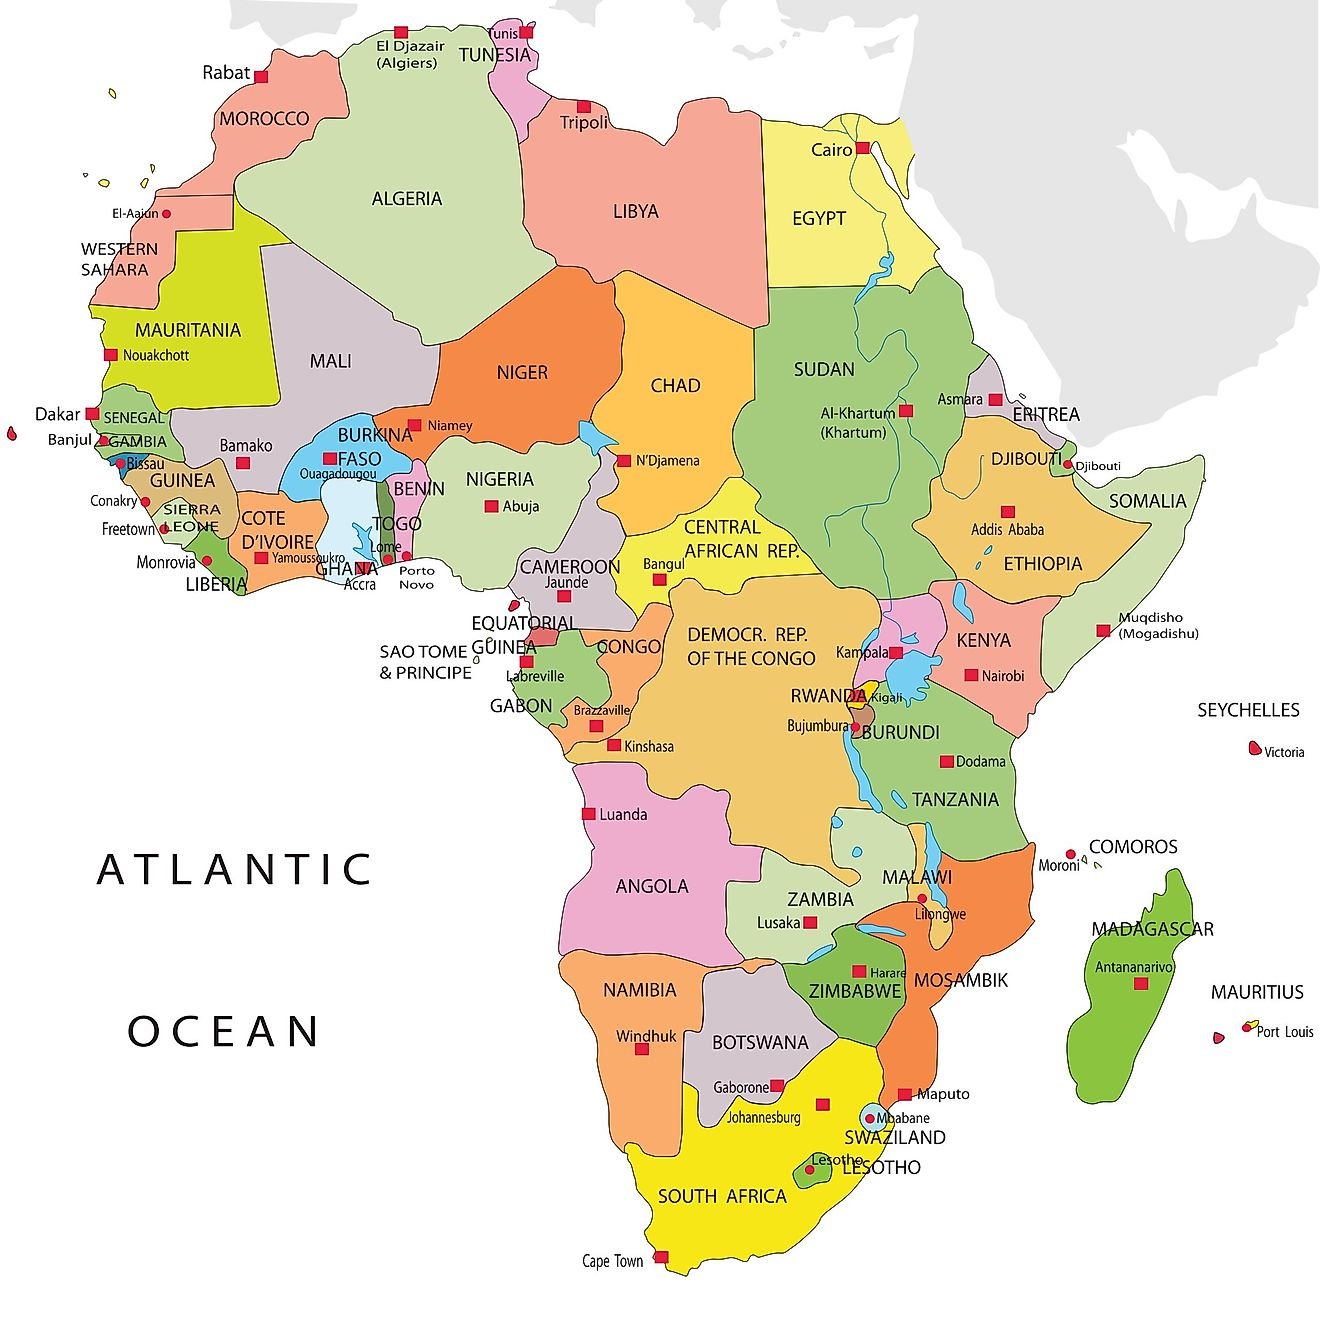 How Many Countries Are There In Africa?